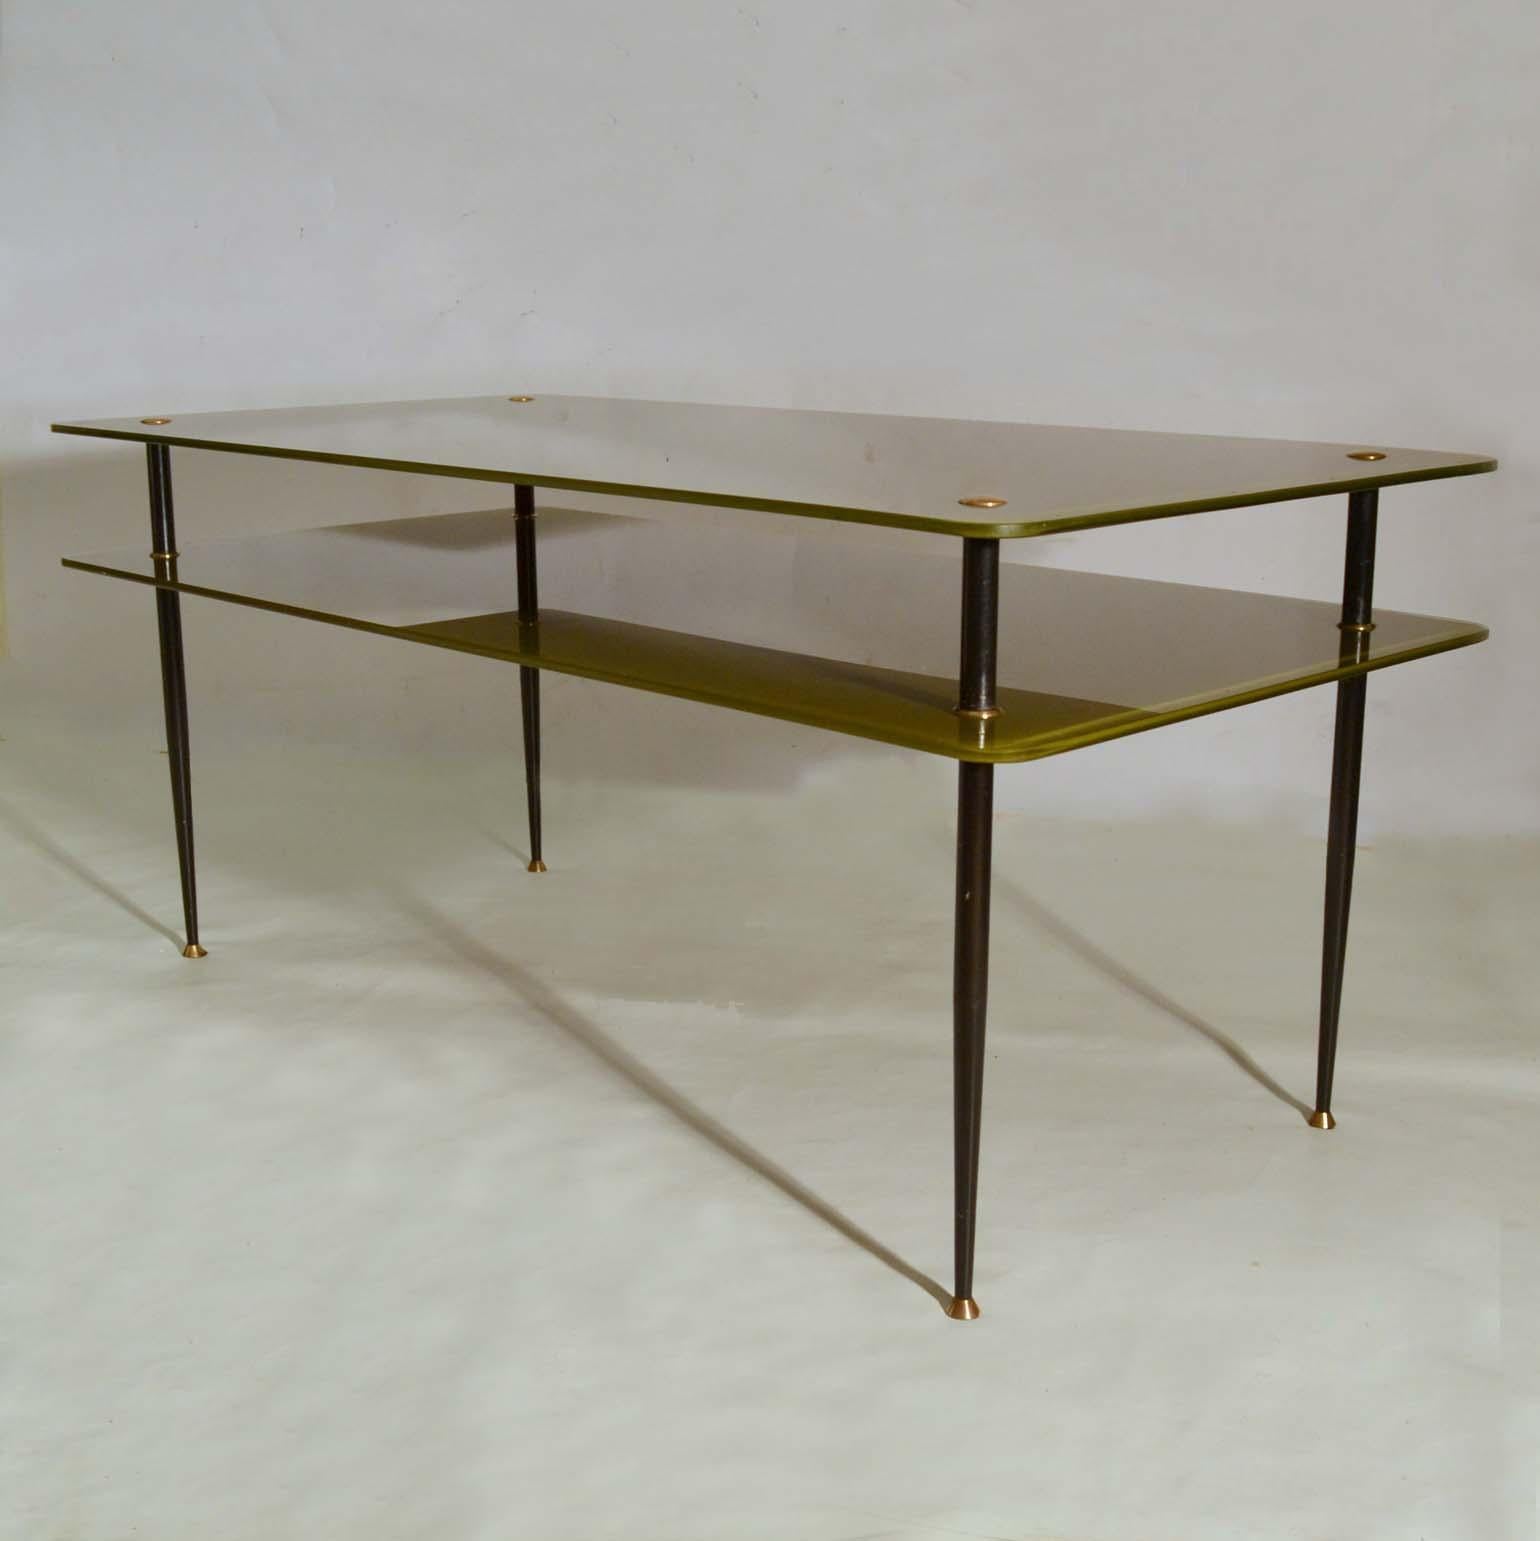 Olive green double layered tempered and painted glass coffee table connected by four black lacquered metal tapered legs. They are highlighted by brass fittings connecting the legs and feet. This unusual colored table distinguishes itself by applying